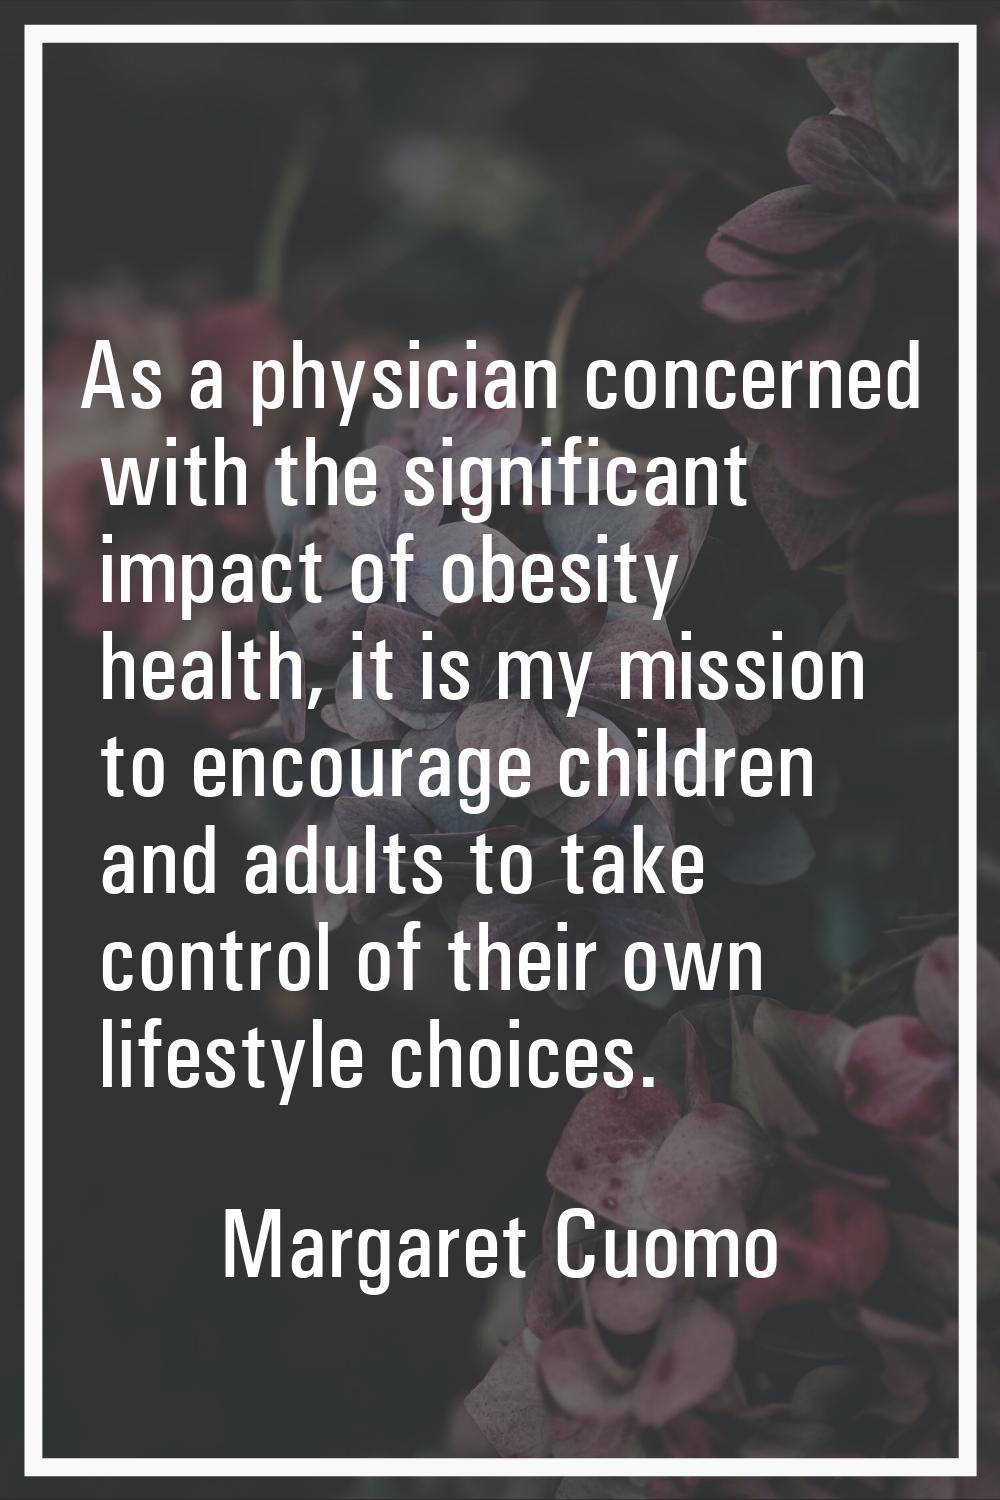 As a physician concerned with the significant impact of obesity health, it is my mission to encoura